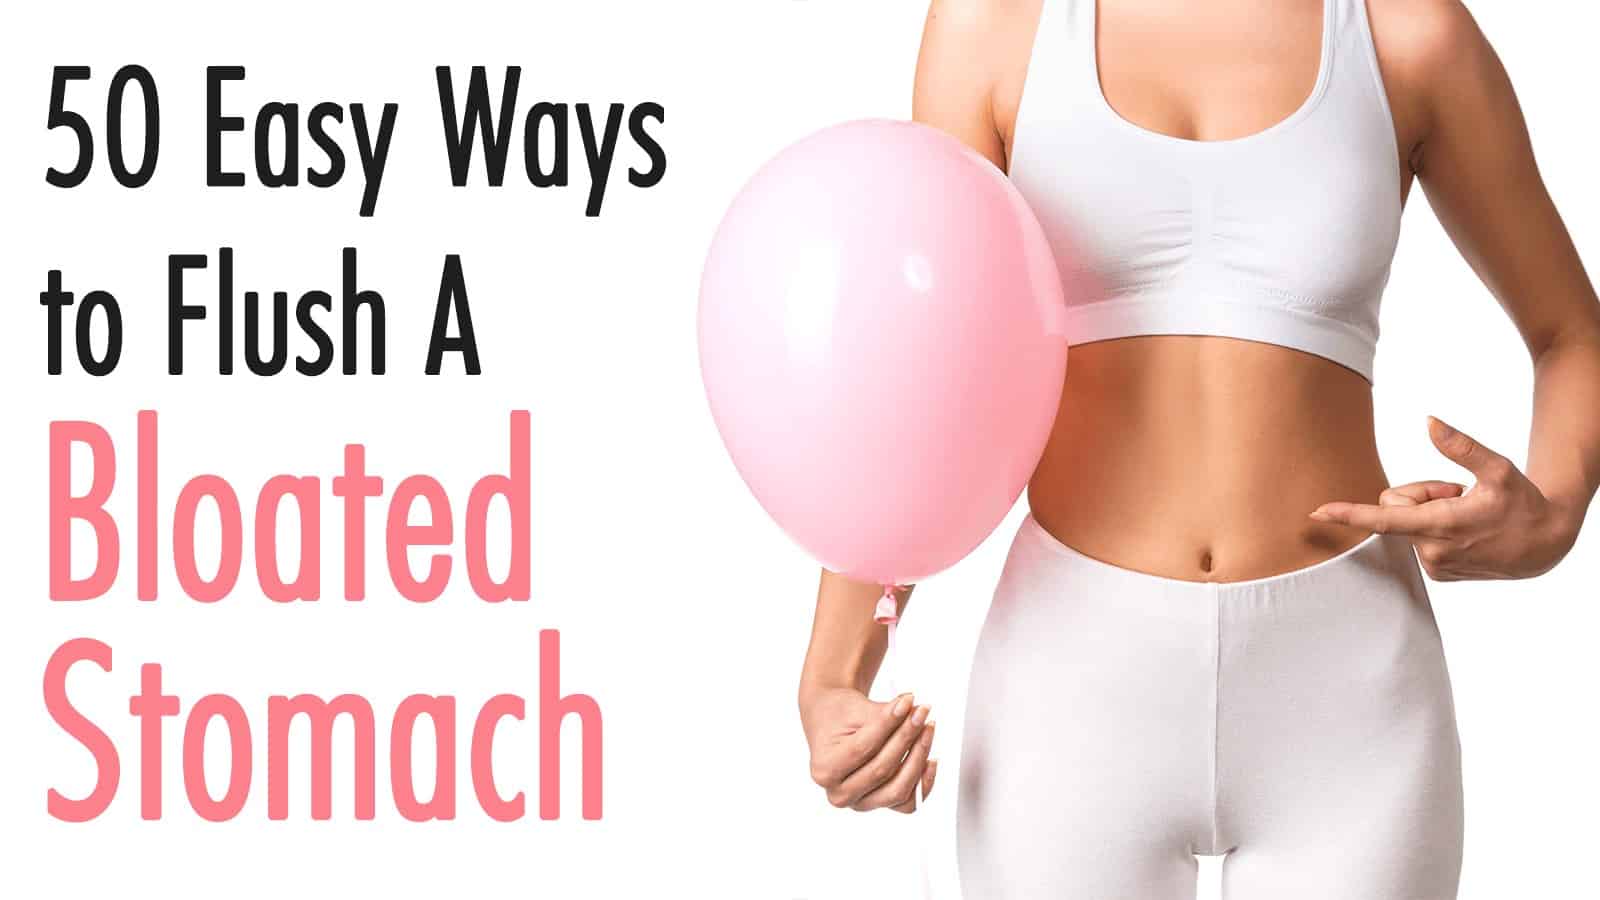 50 Easy Ways to Flush A Bloated Stomach